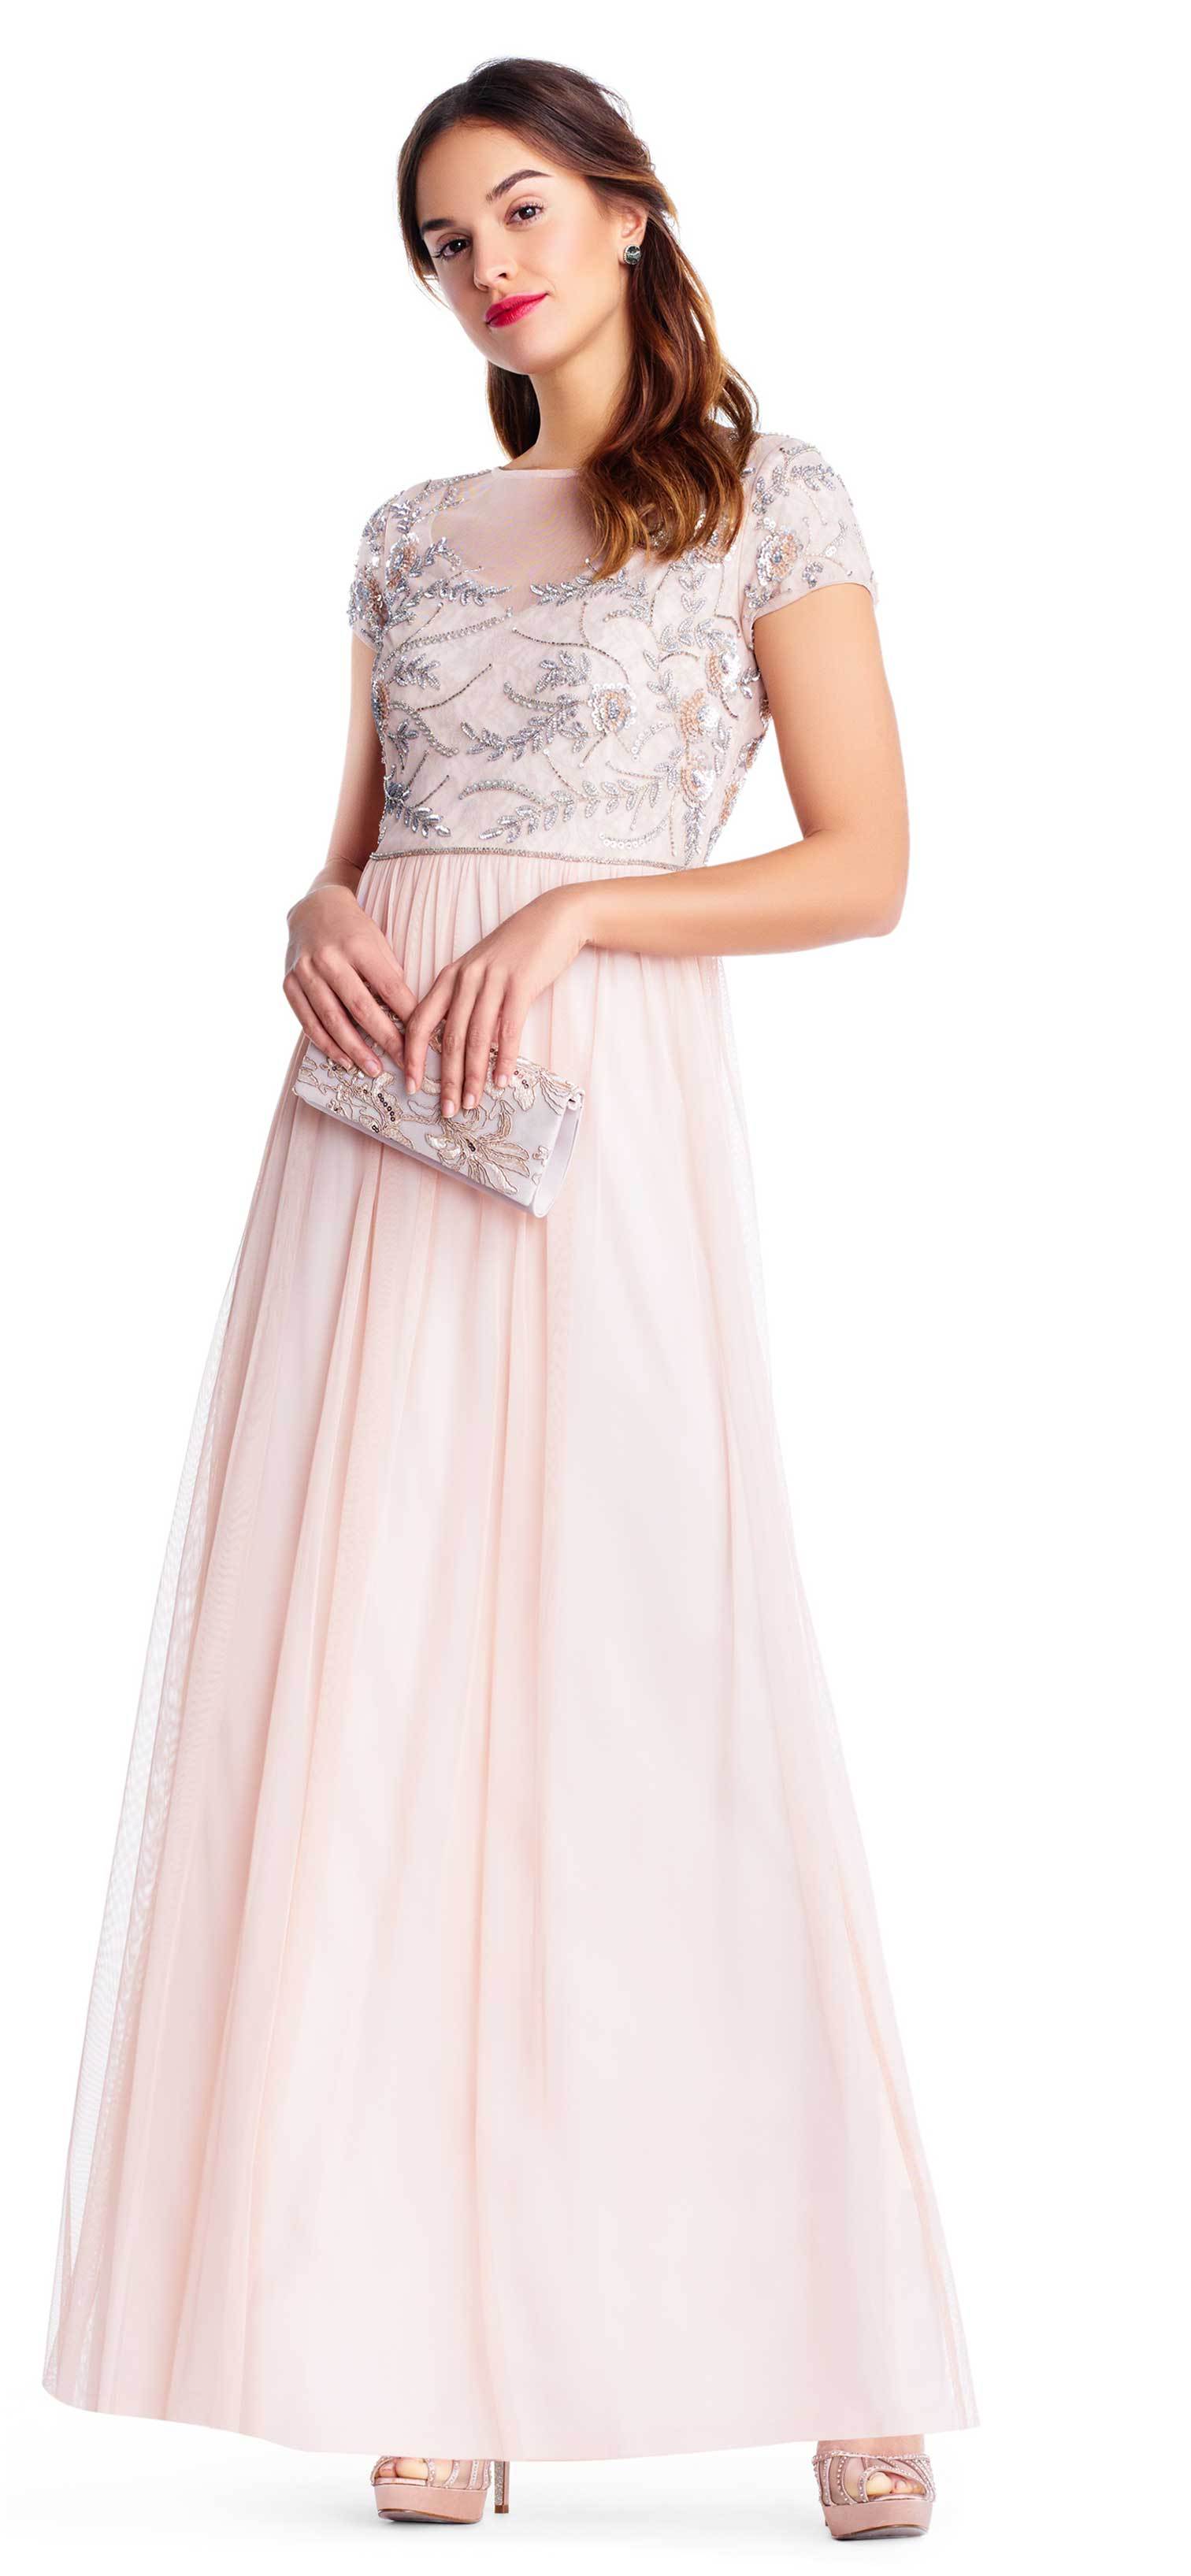 Image of Adrianna Papell - AP1E202874 Embellished Illusion Tulle A-line Dress